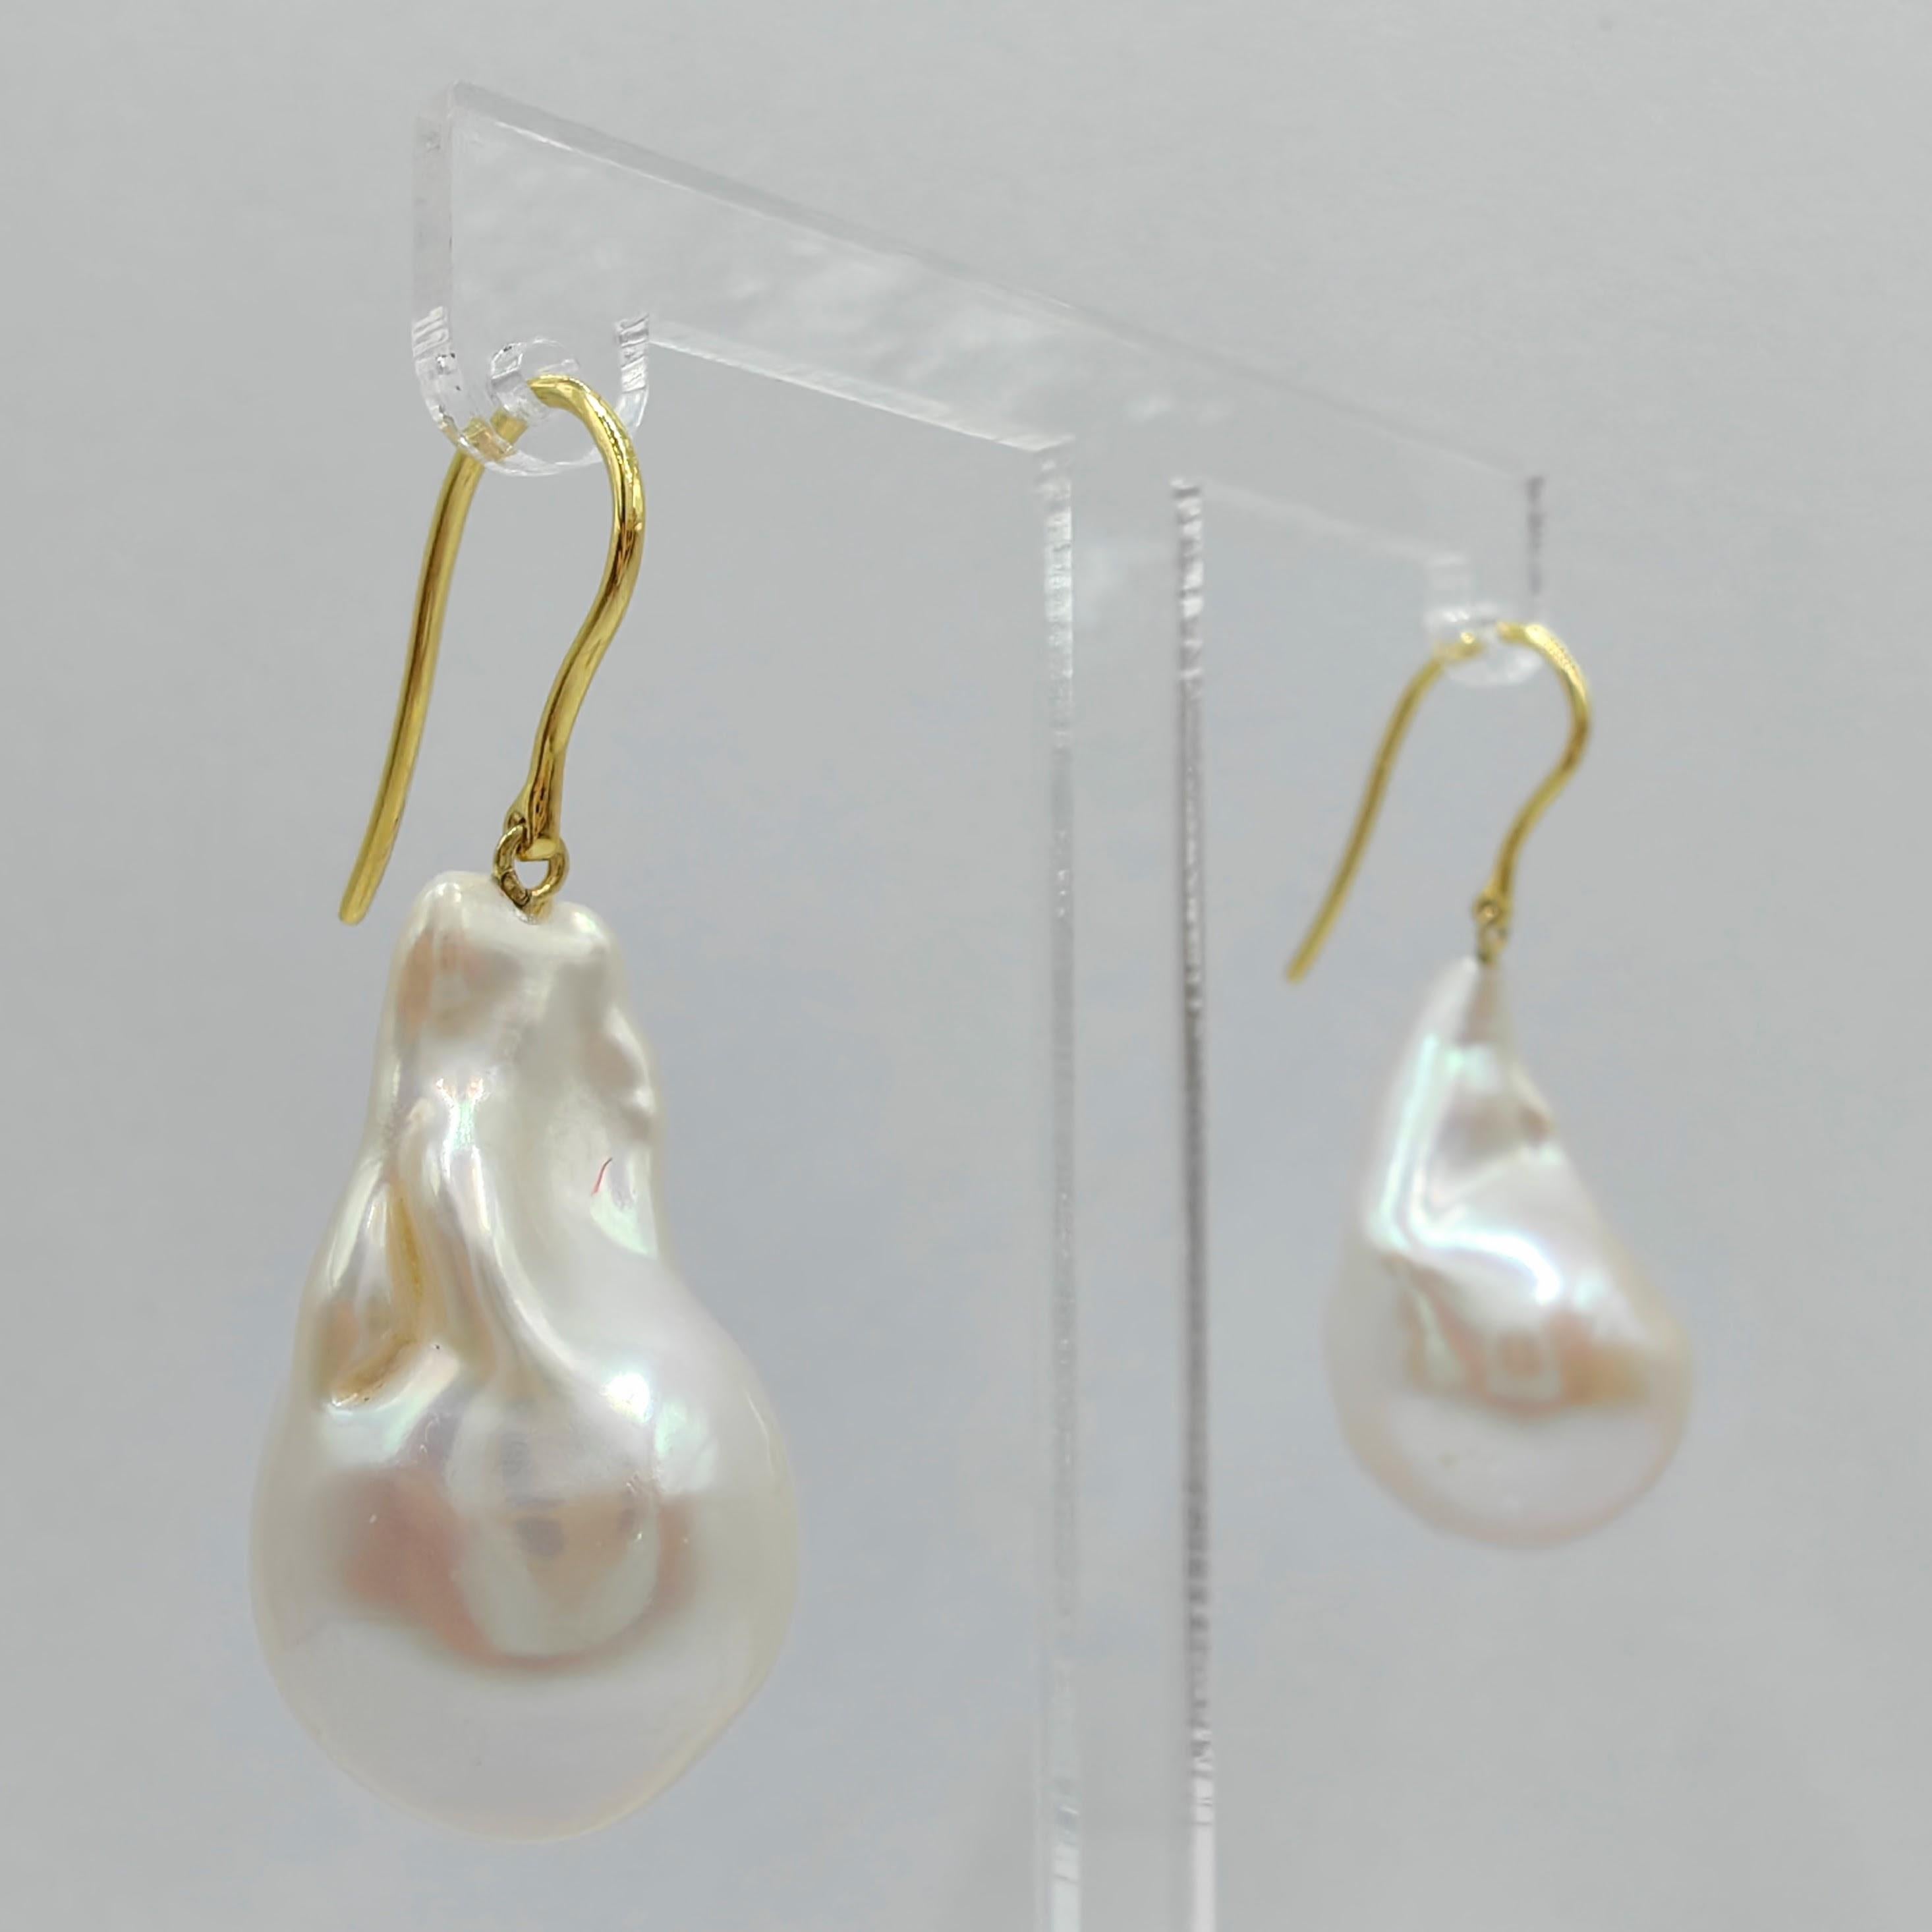 Uncut Iridescent Baroque Pearl Drop Earrings With 18K Yellow Gold French Hooks For Sale